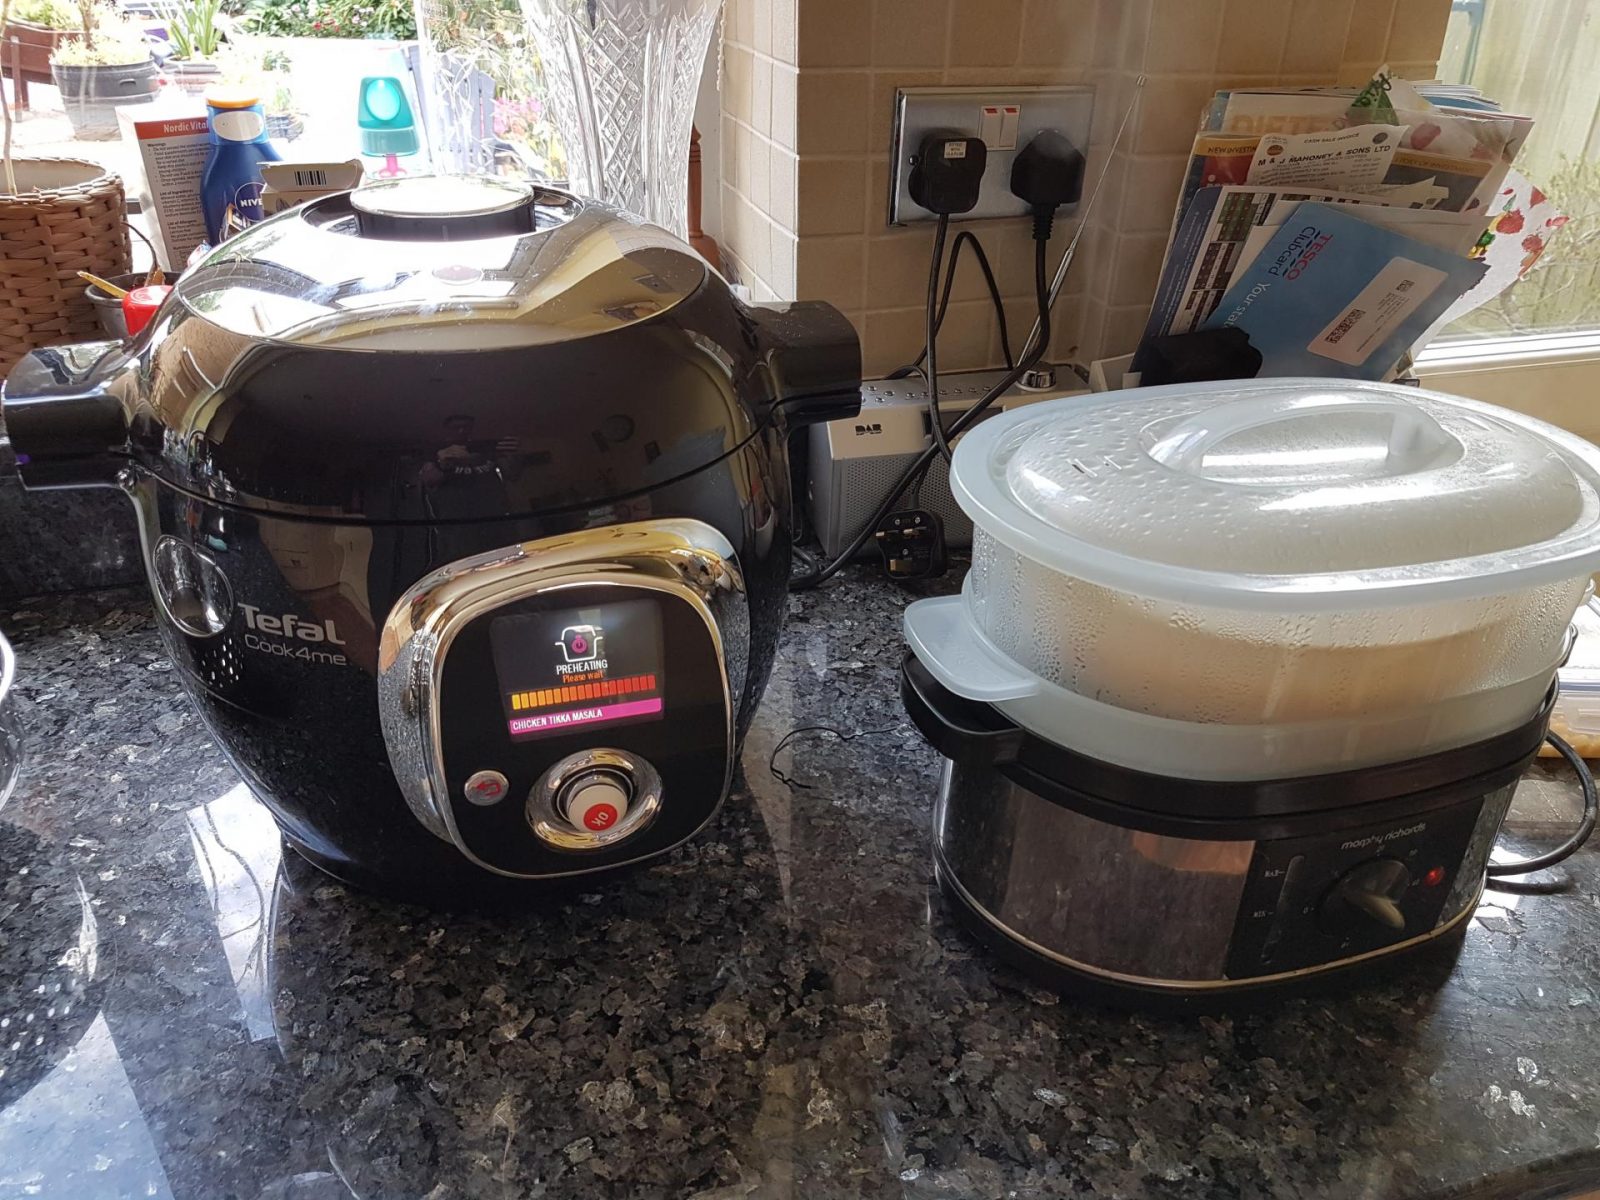 Using the Tefal Cook4Me